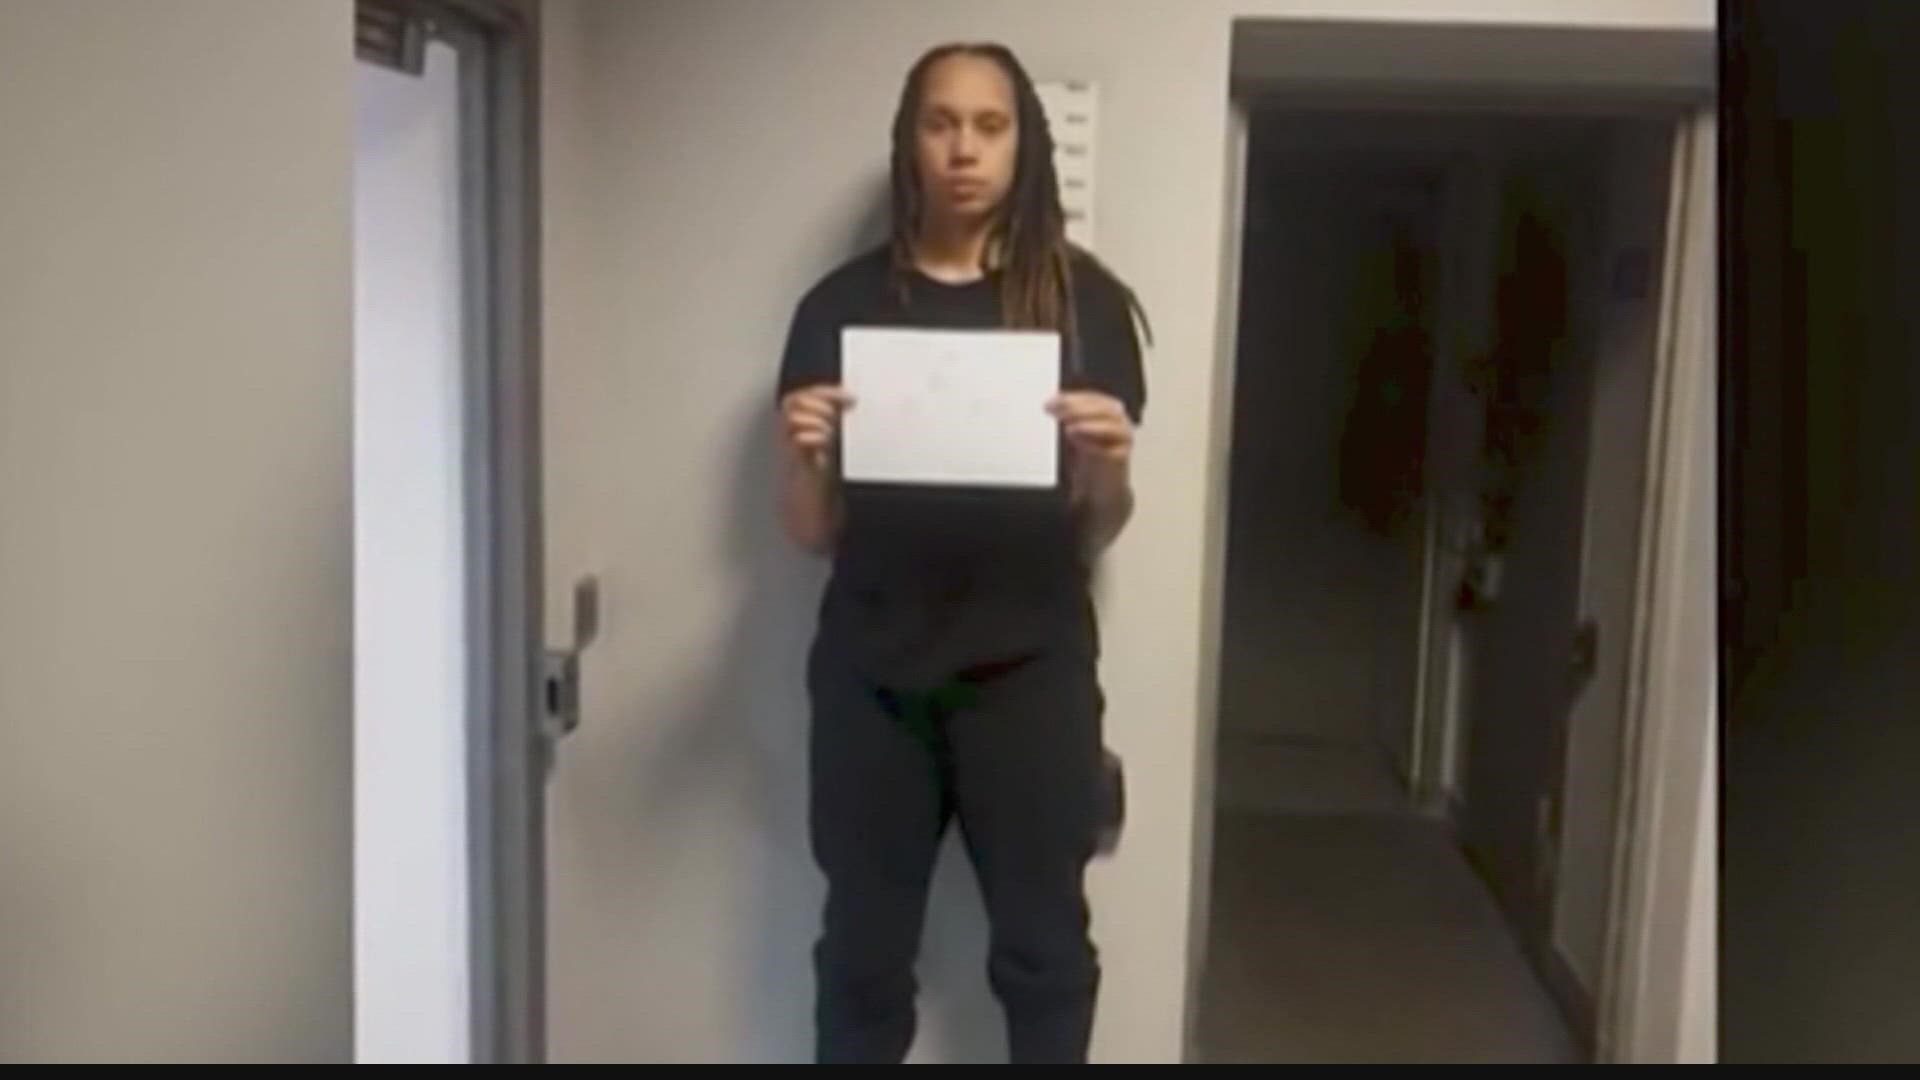 U.S. basketball star Brittney Griner will remain in Russian custody through at least July 2 after her detention was extended for a third time.